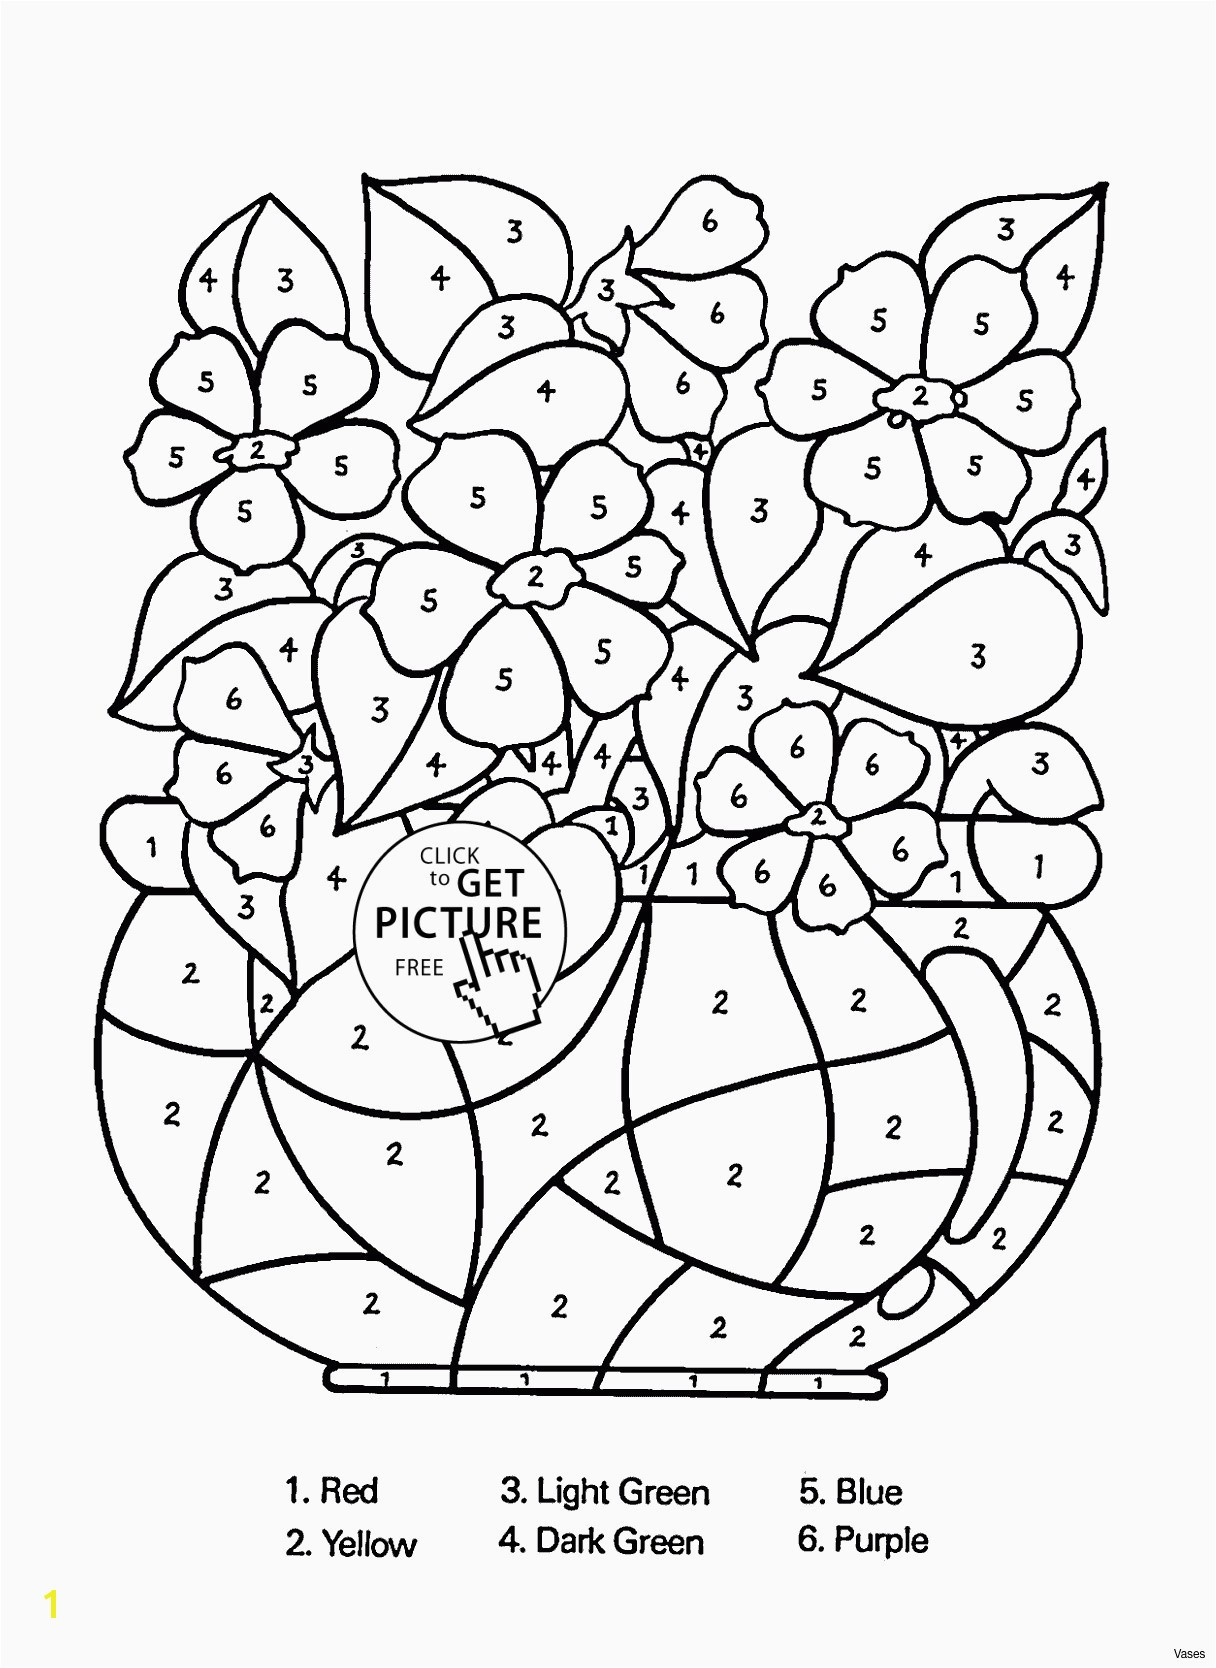 blue and white flower vase of flowers printable coloring pages zabelyesayan com within flowers printable coloring pages free printable flower coloring pages best vases flower vase